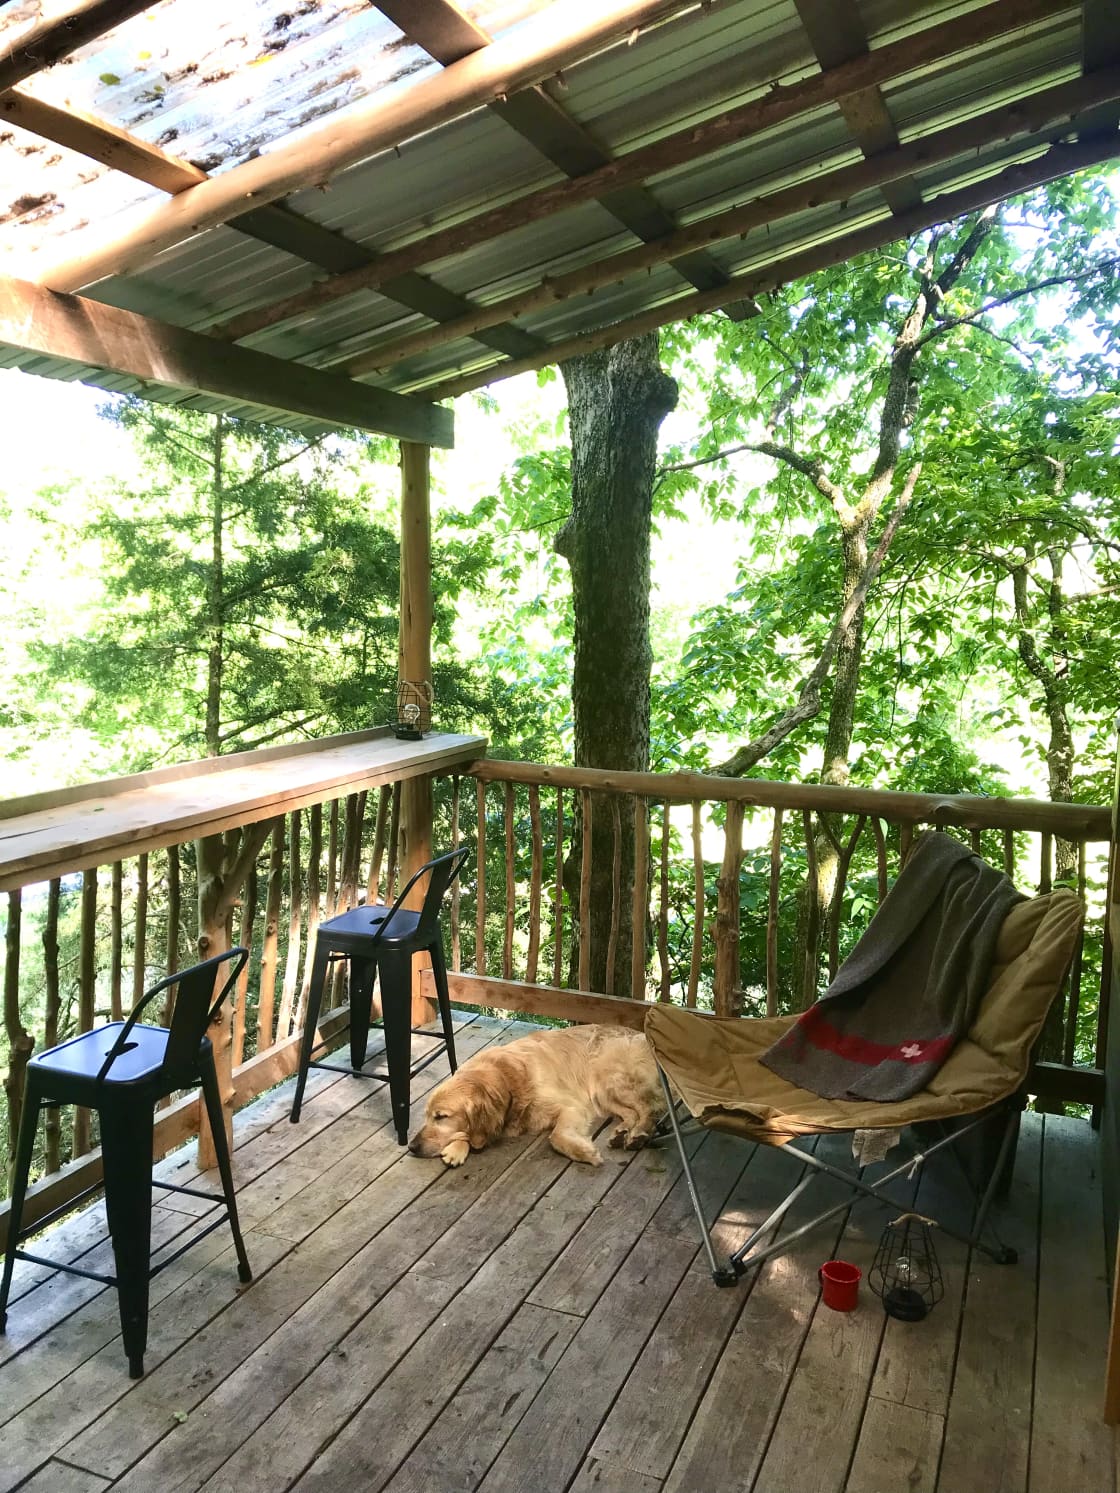 Covered deck on treehouse